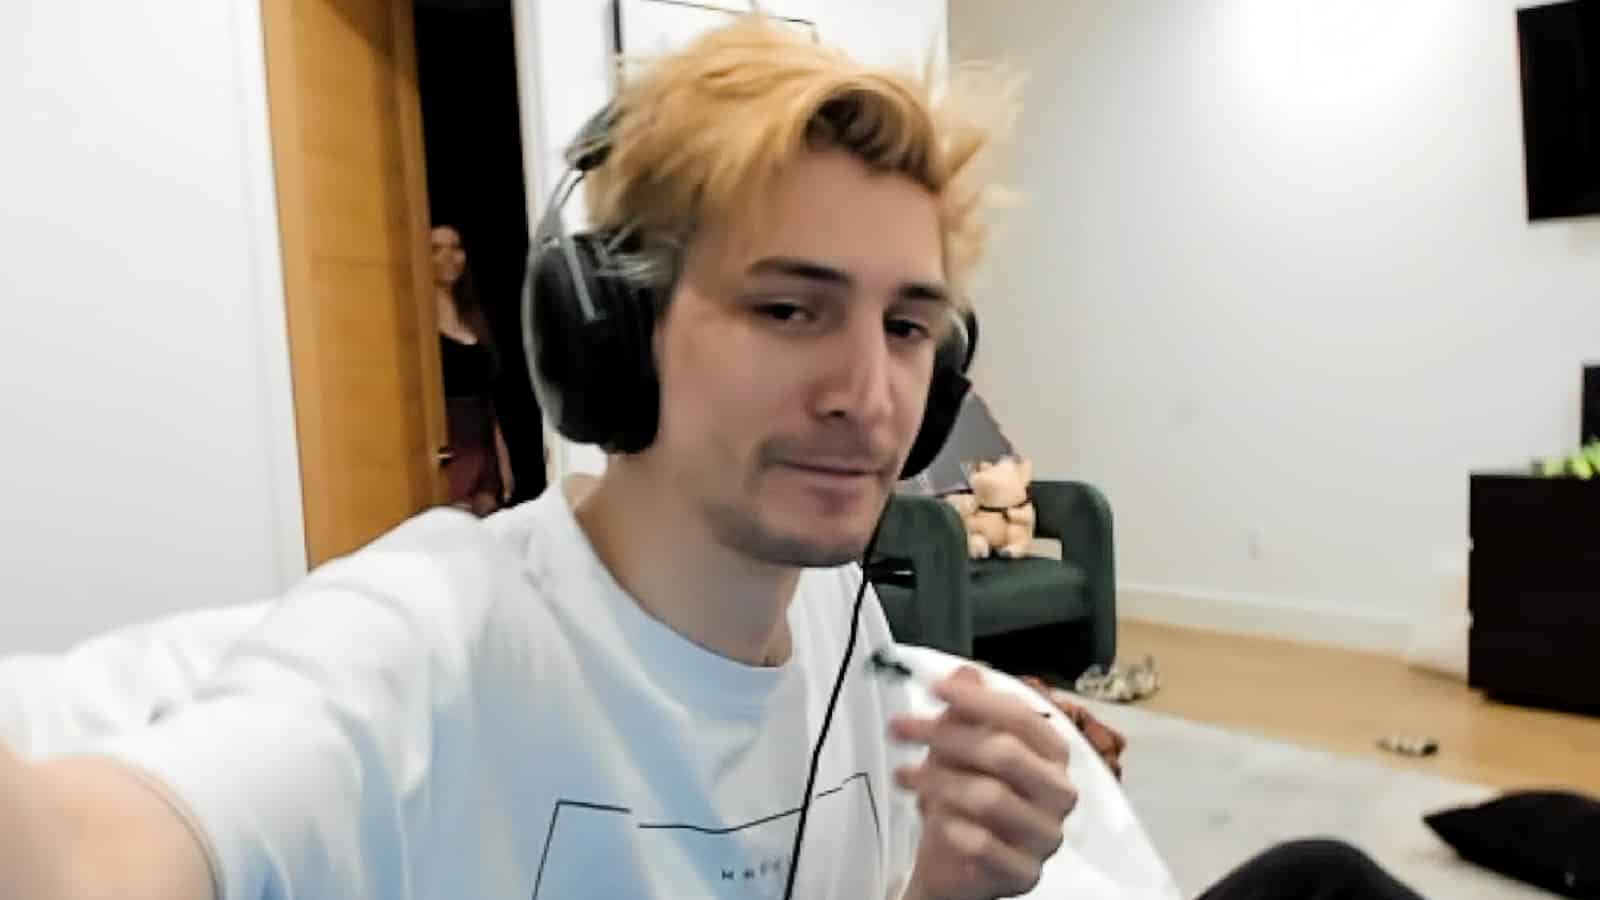 xQc's room on Twitch